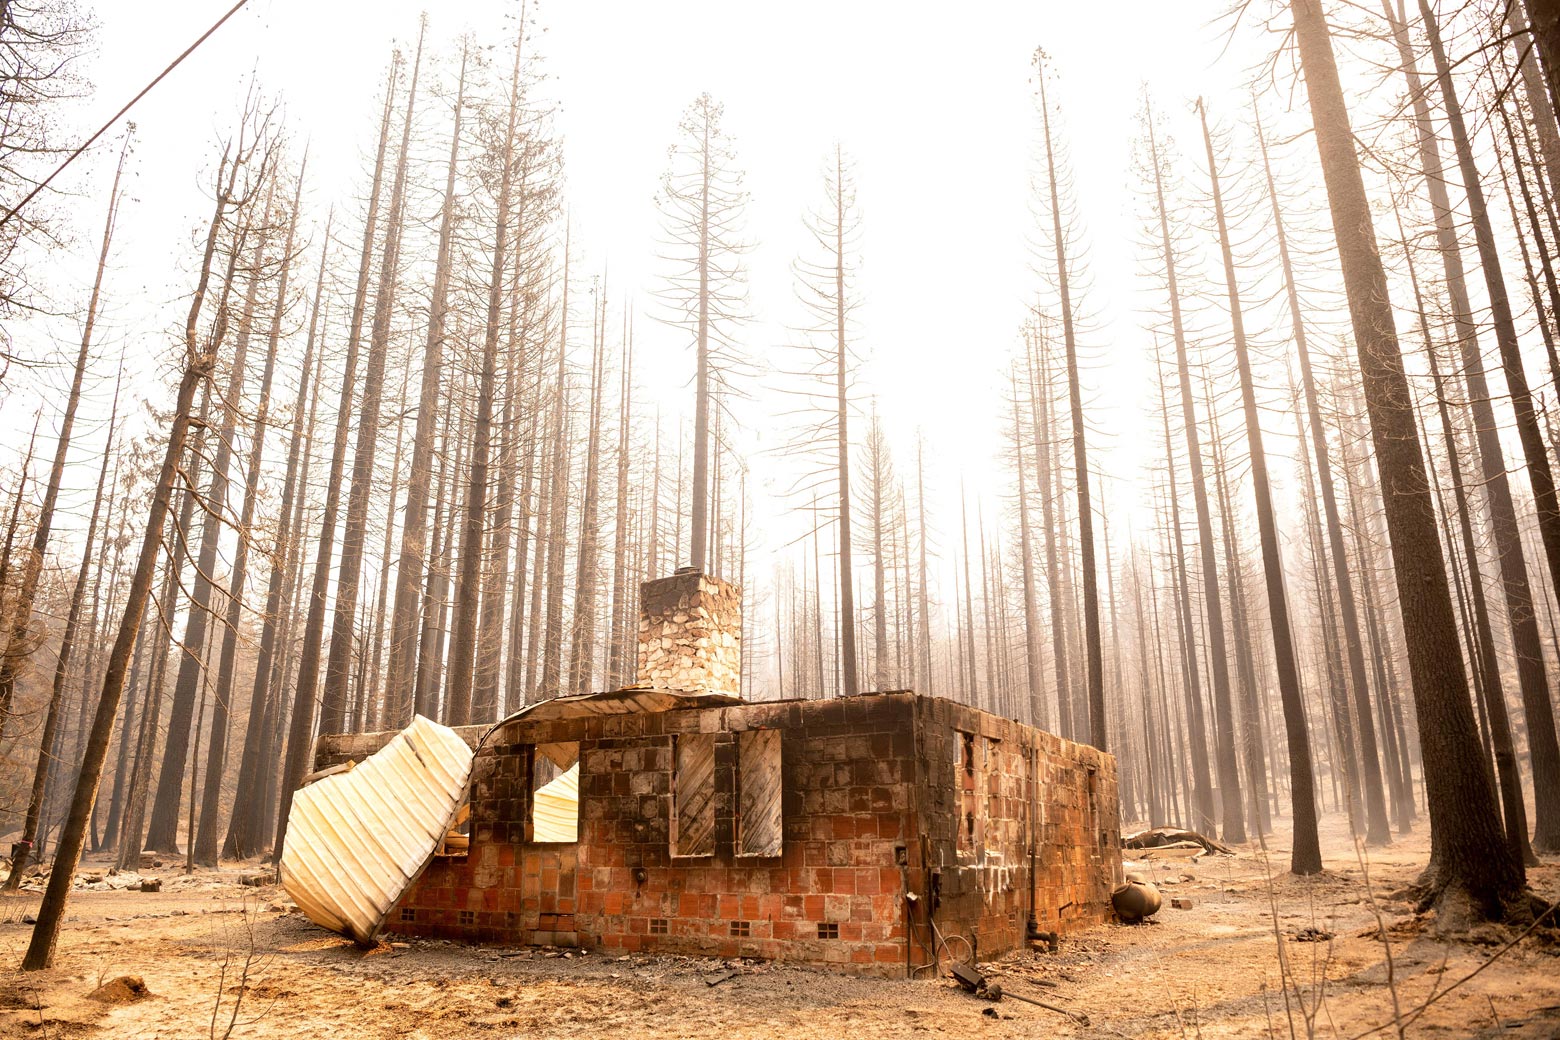 Just the first-story brick remains of a home amid tall barren trees in a forest